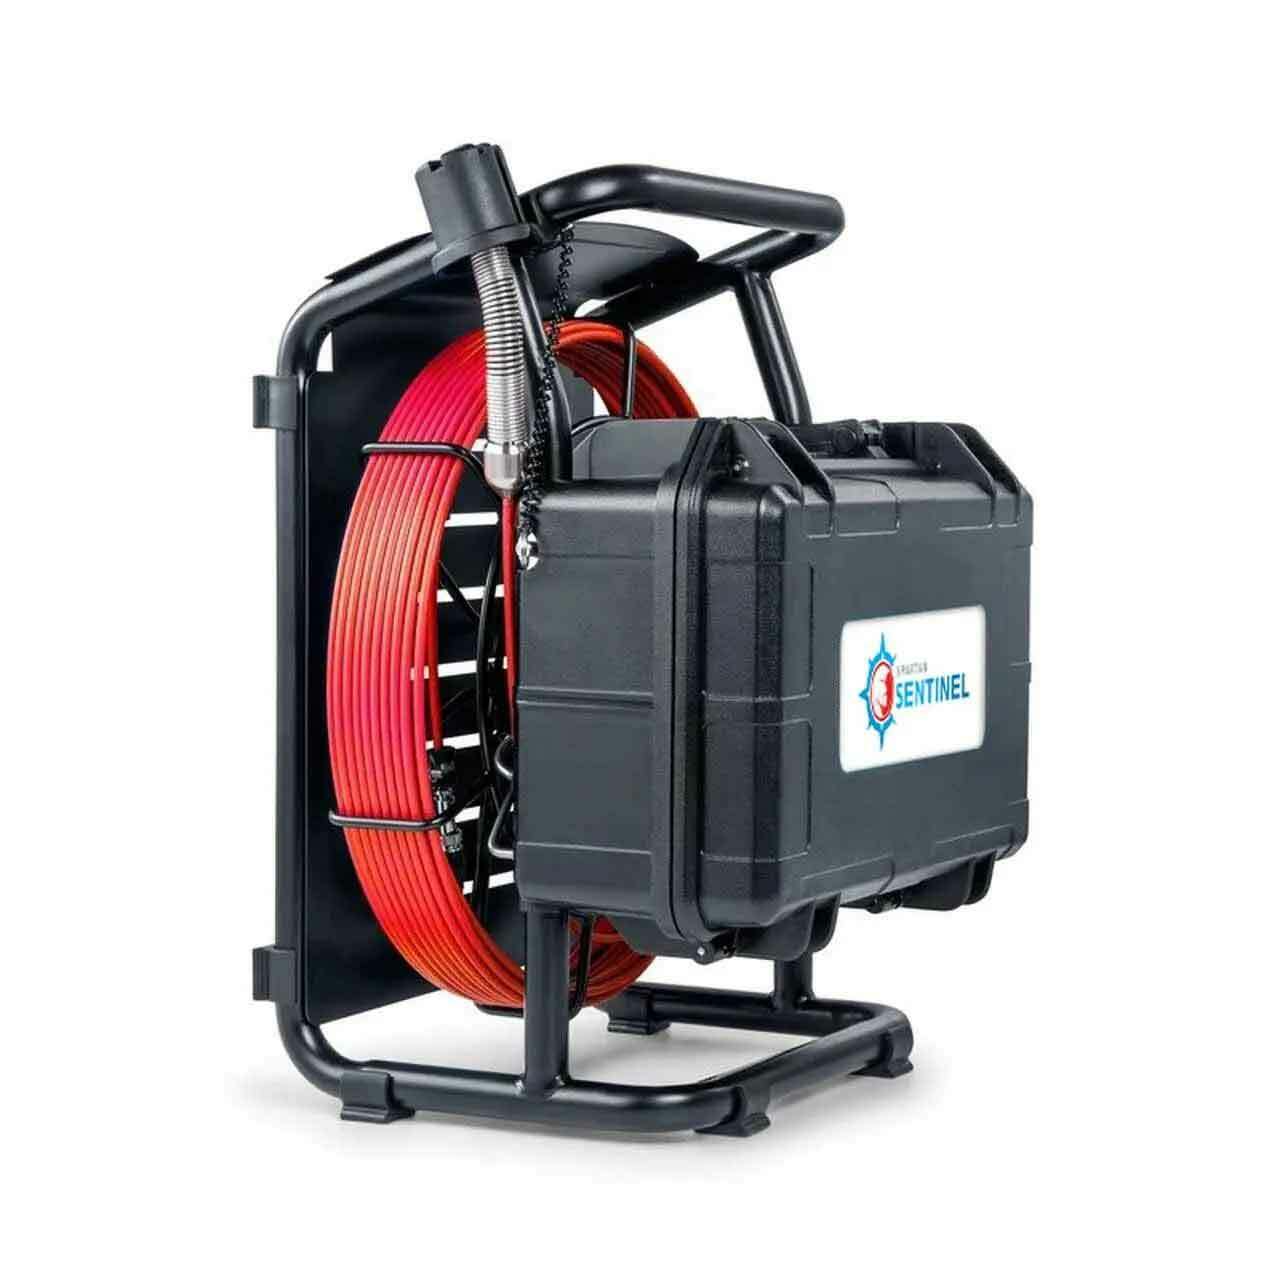 Spartan Tool Sentinel Sewer Inspection Camera